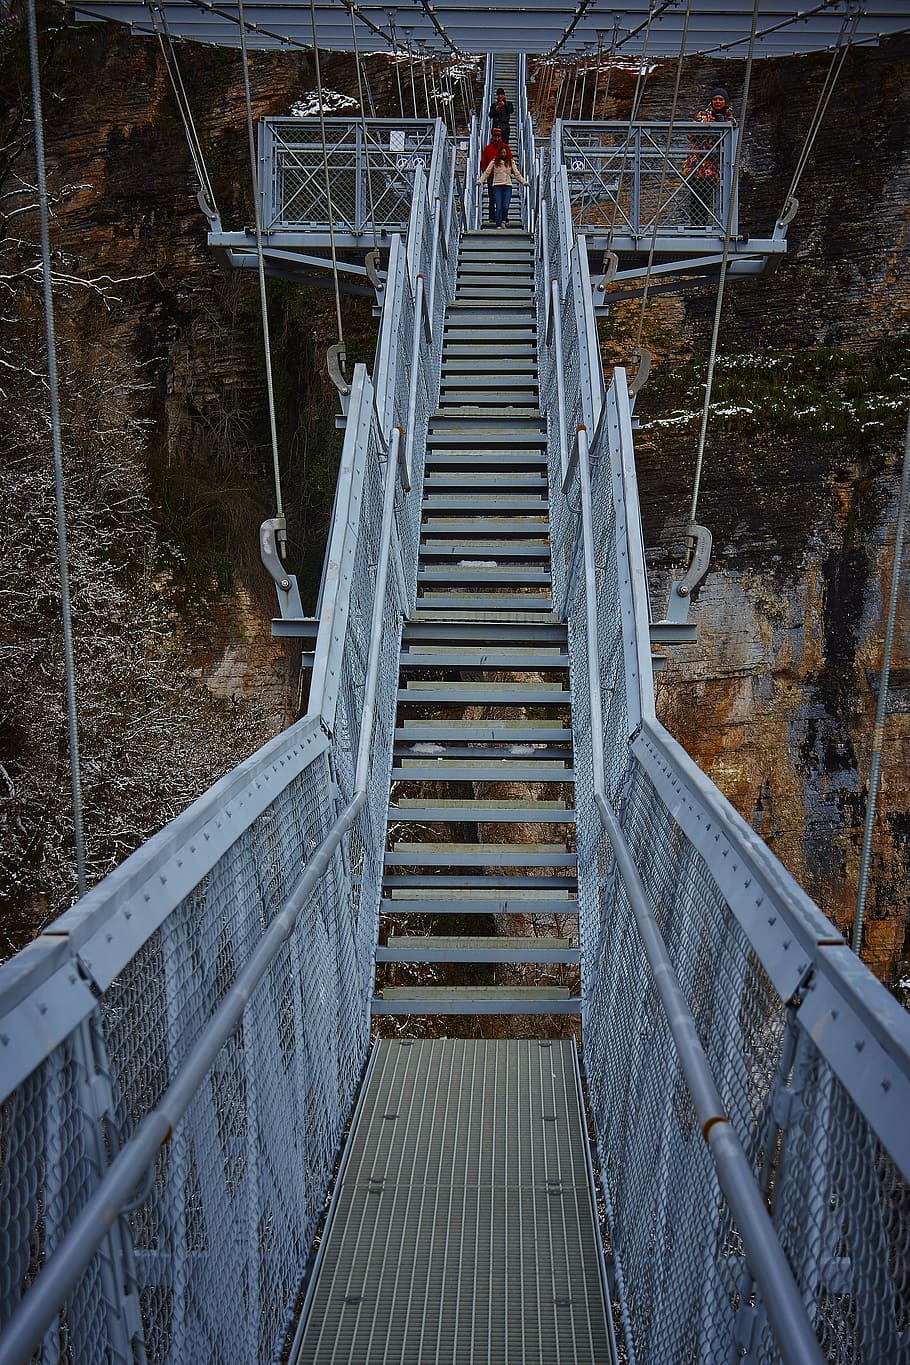 sochi, bridge, sky bridge, architecture, built structure, staircase, railing, connection, steps and staircases, the way forward